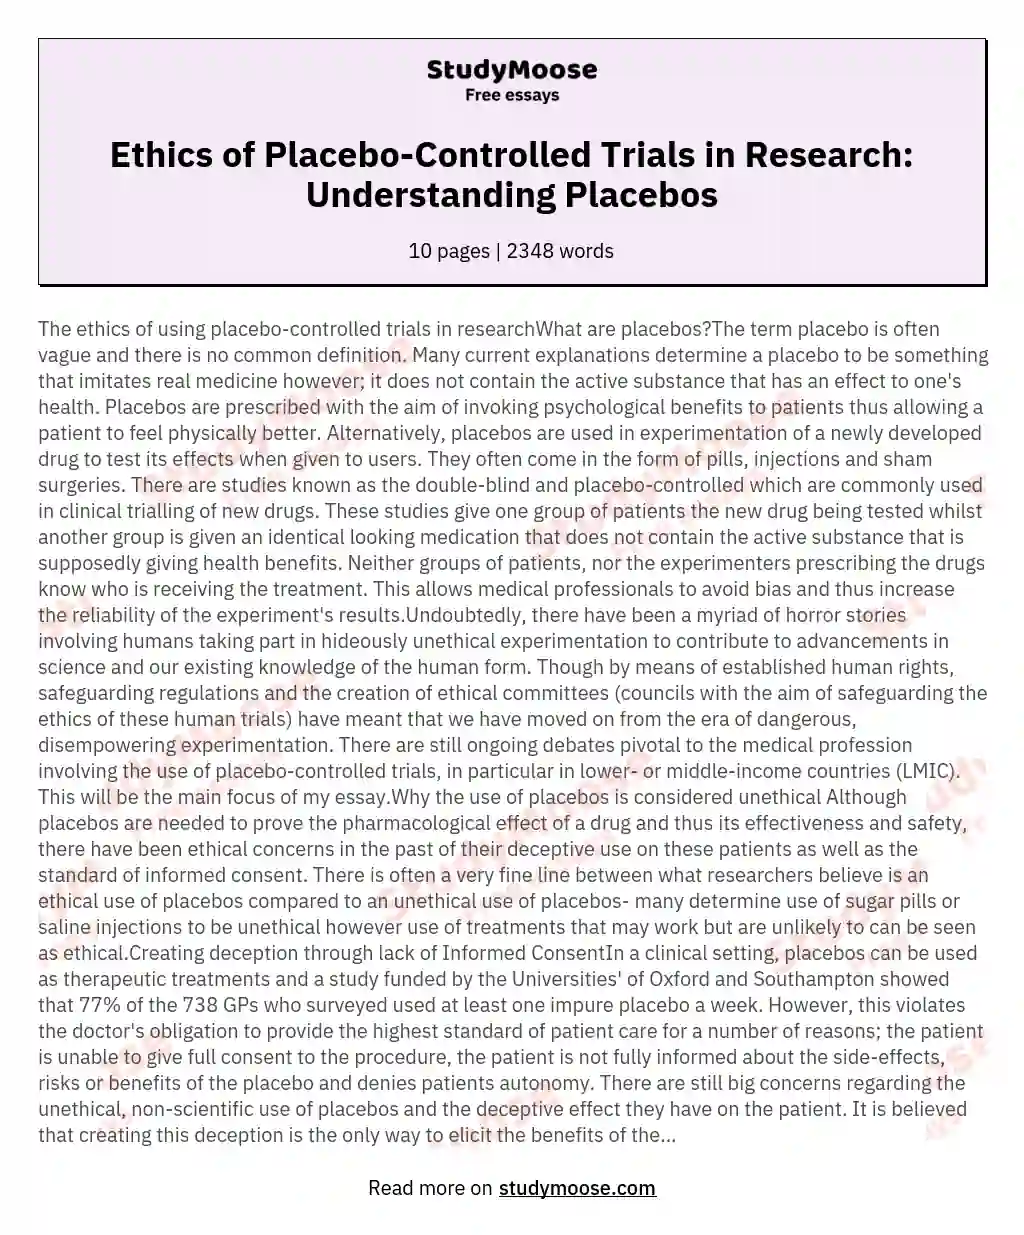 Ethics of Placebo-Controlled Trials in Research: Understanding Placebos essay